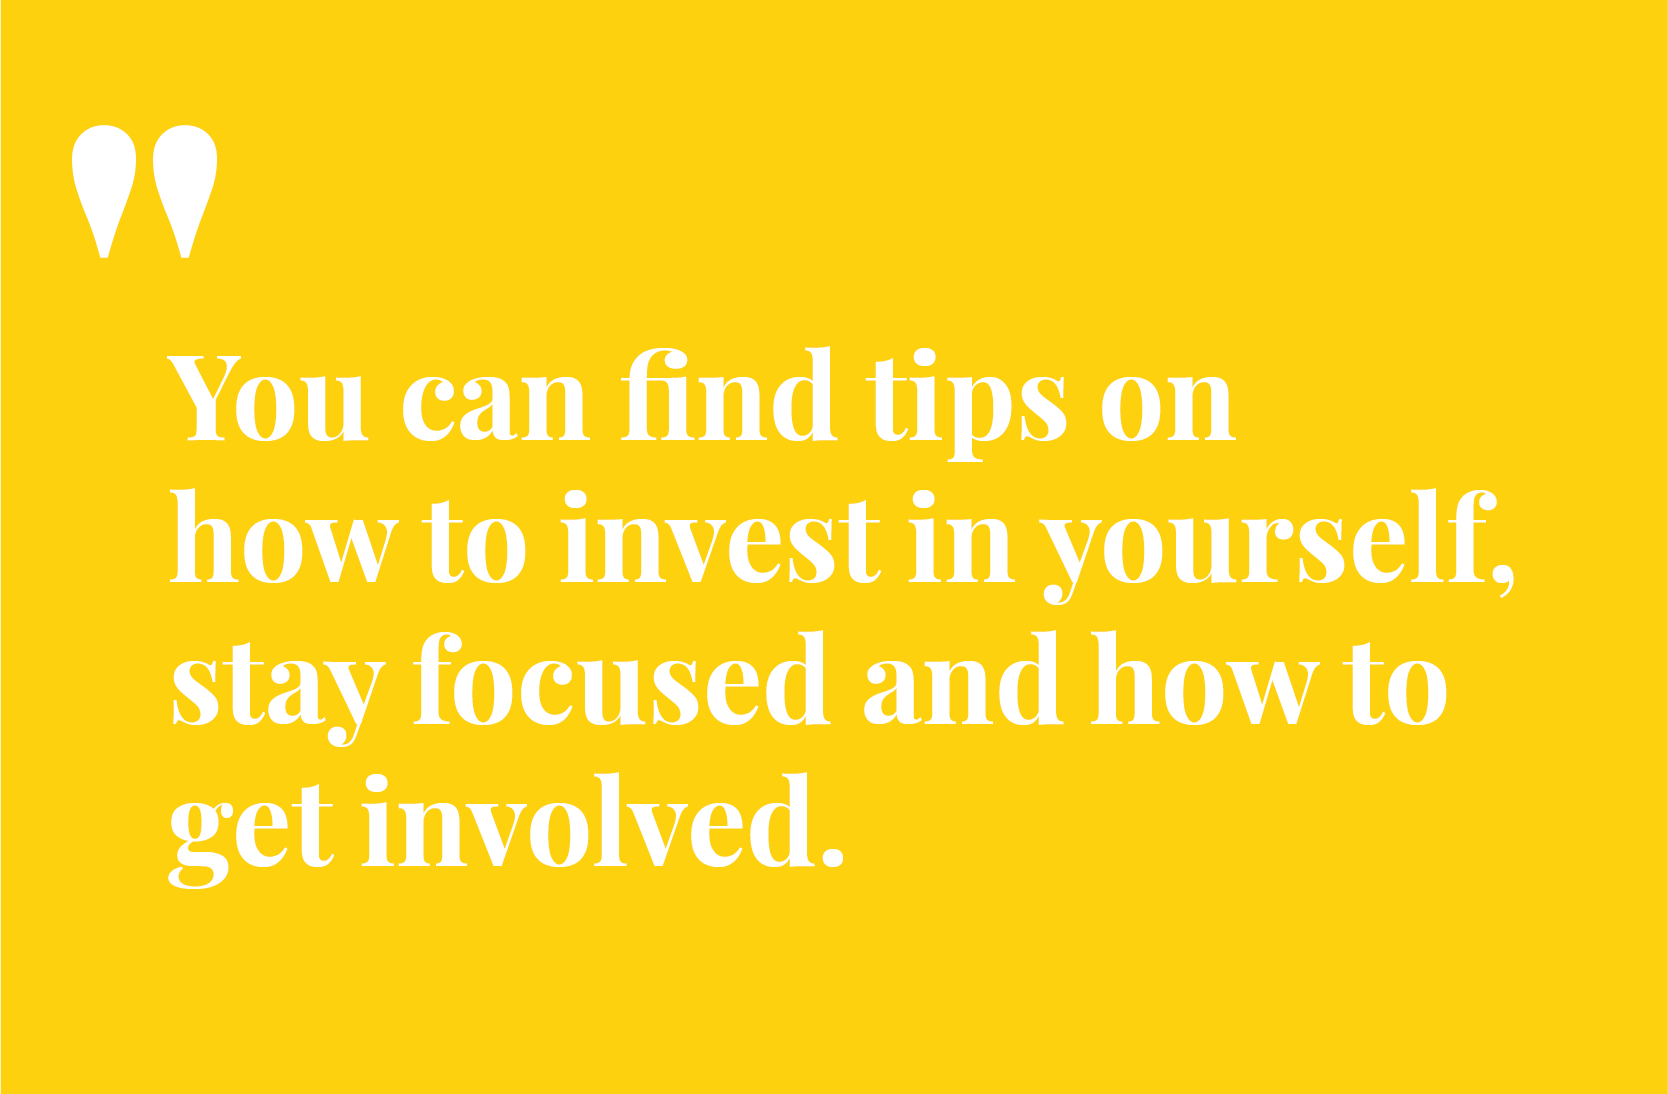 Find tips, on how to invest in yourself and stay focused and how to get involved